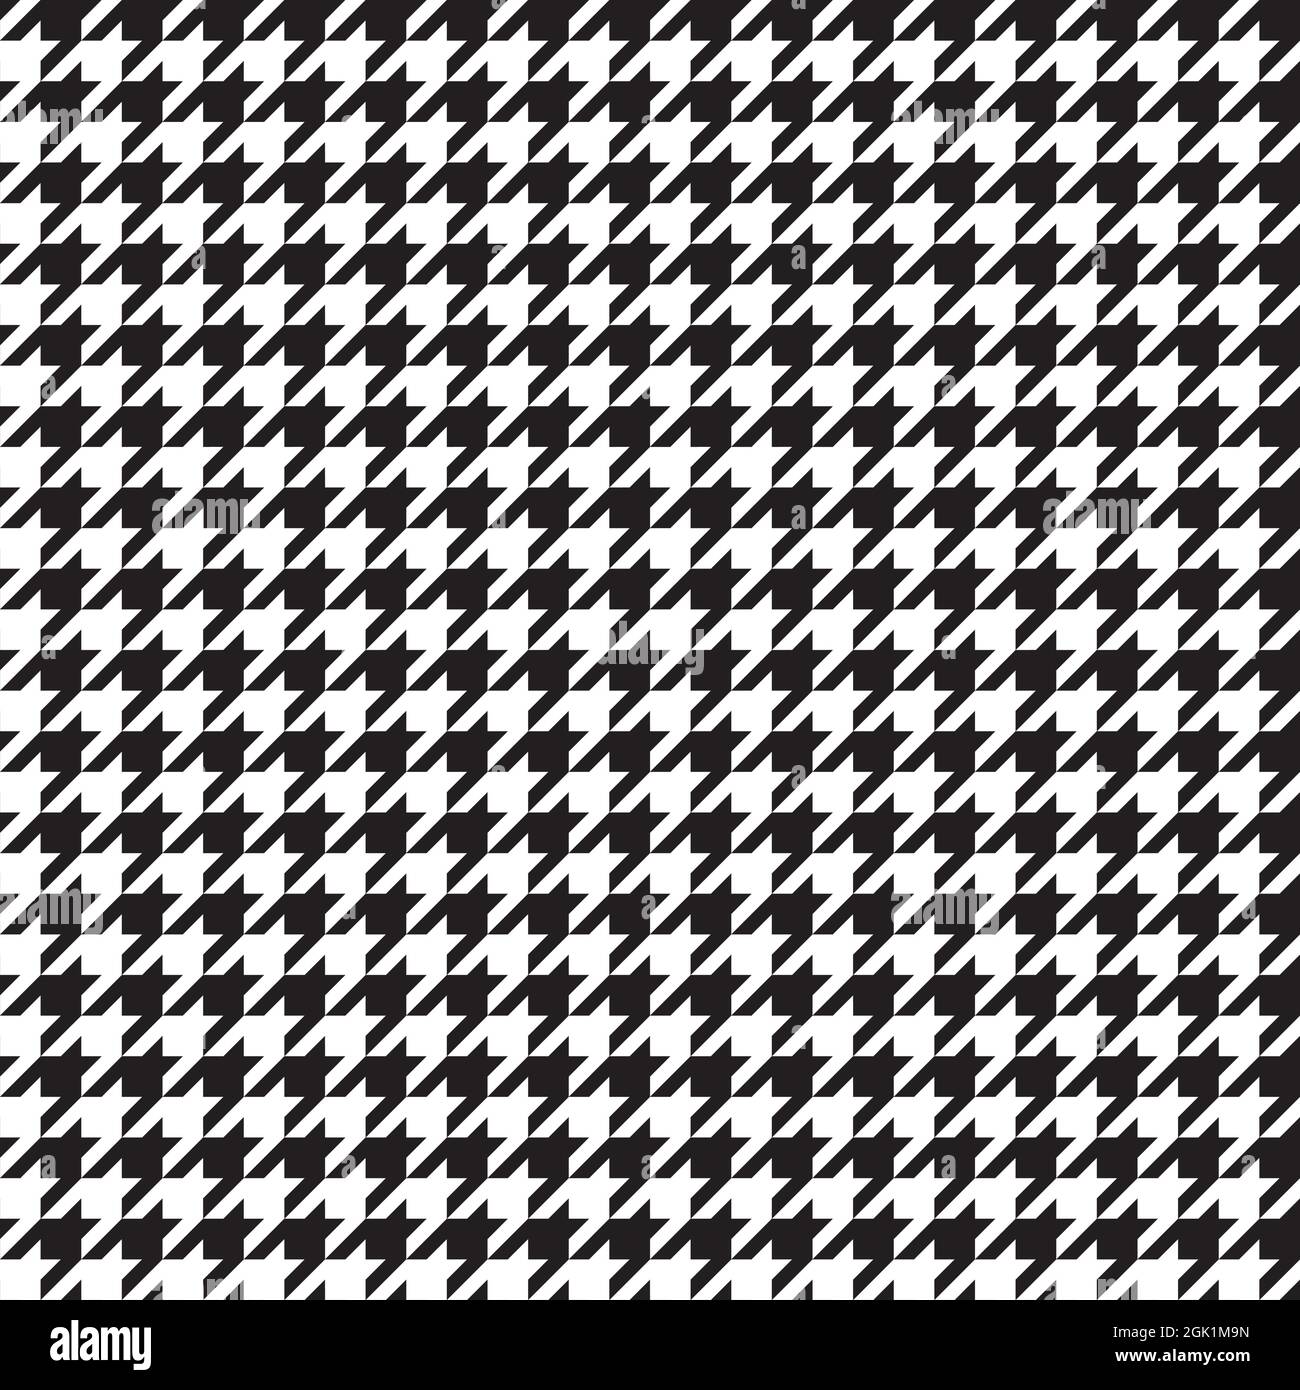 Seamless fabric houndstooth pattern background Stock Vector Image